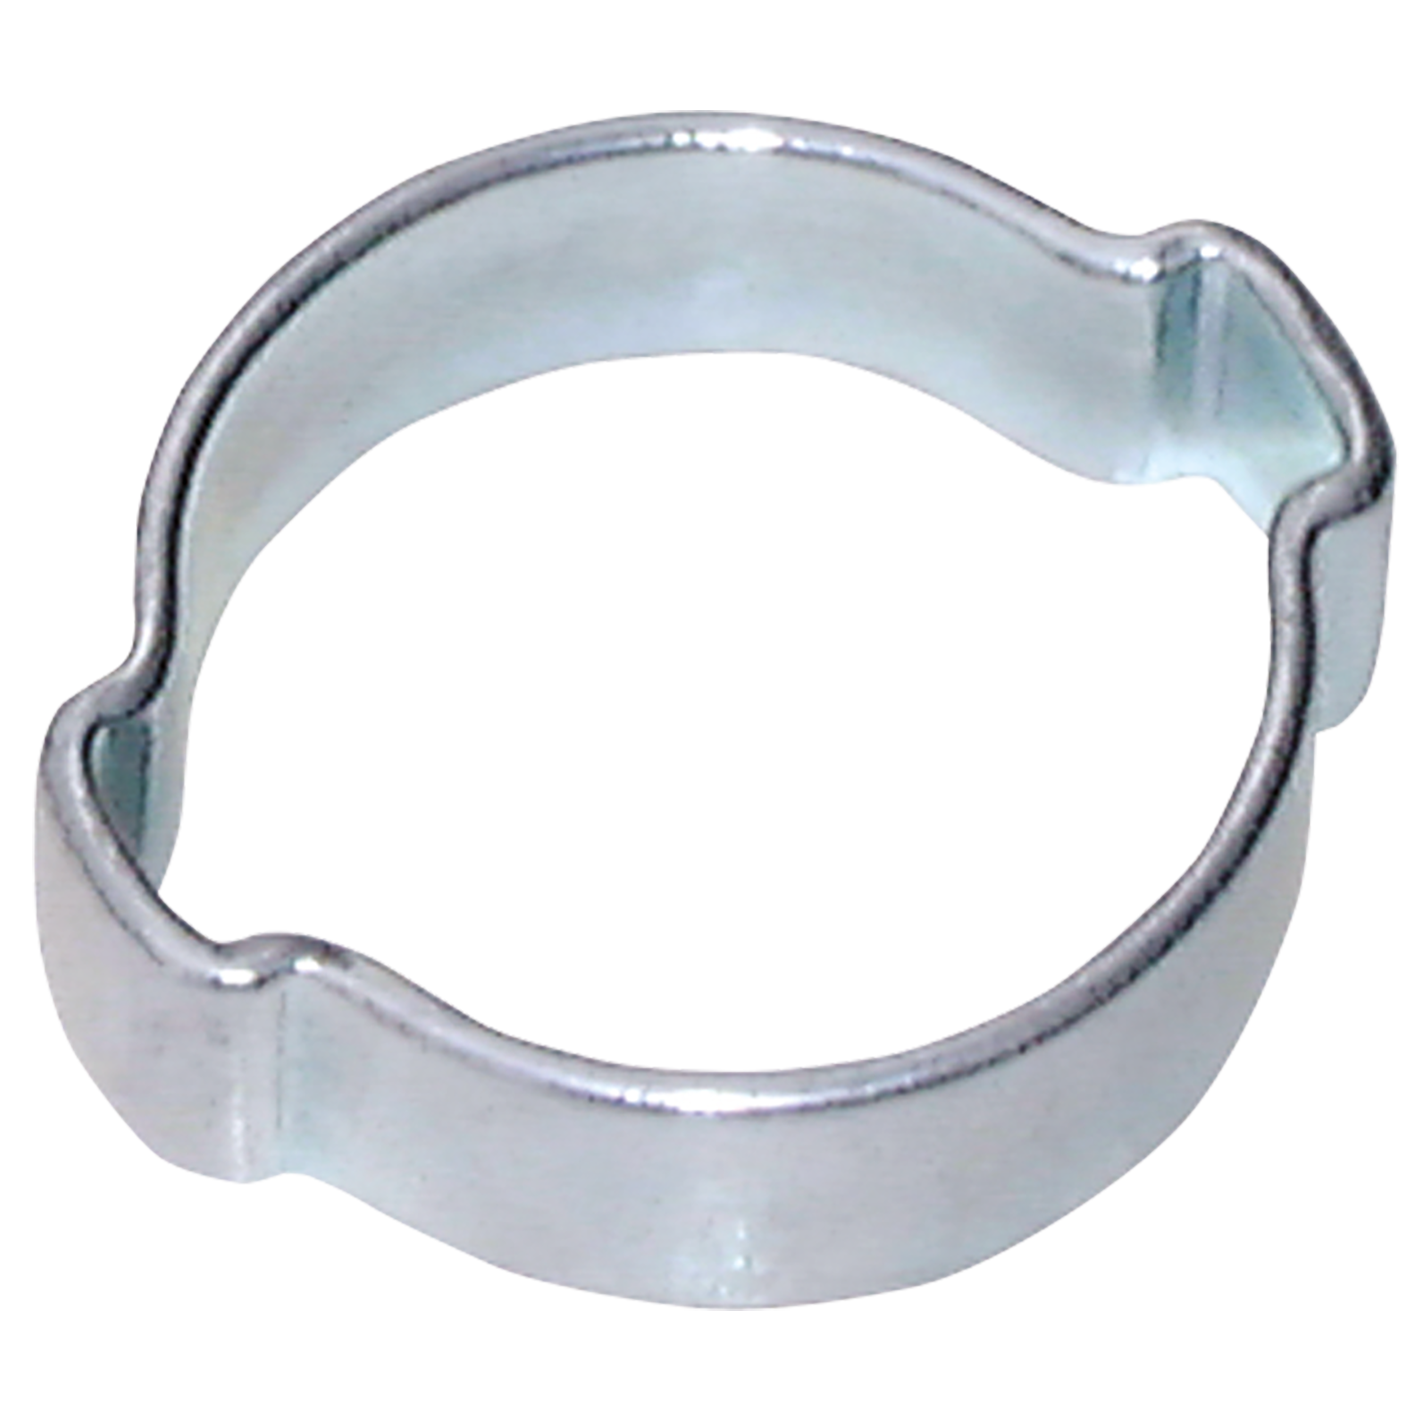 11.0-13.0MM 2-EAR STEEL CLAMP PLATED